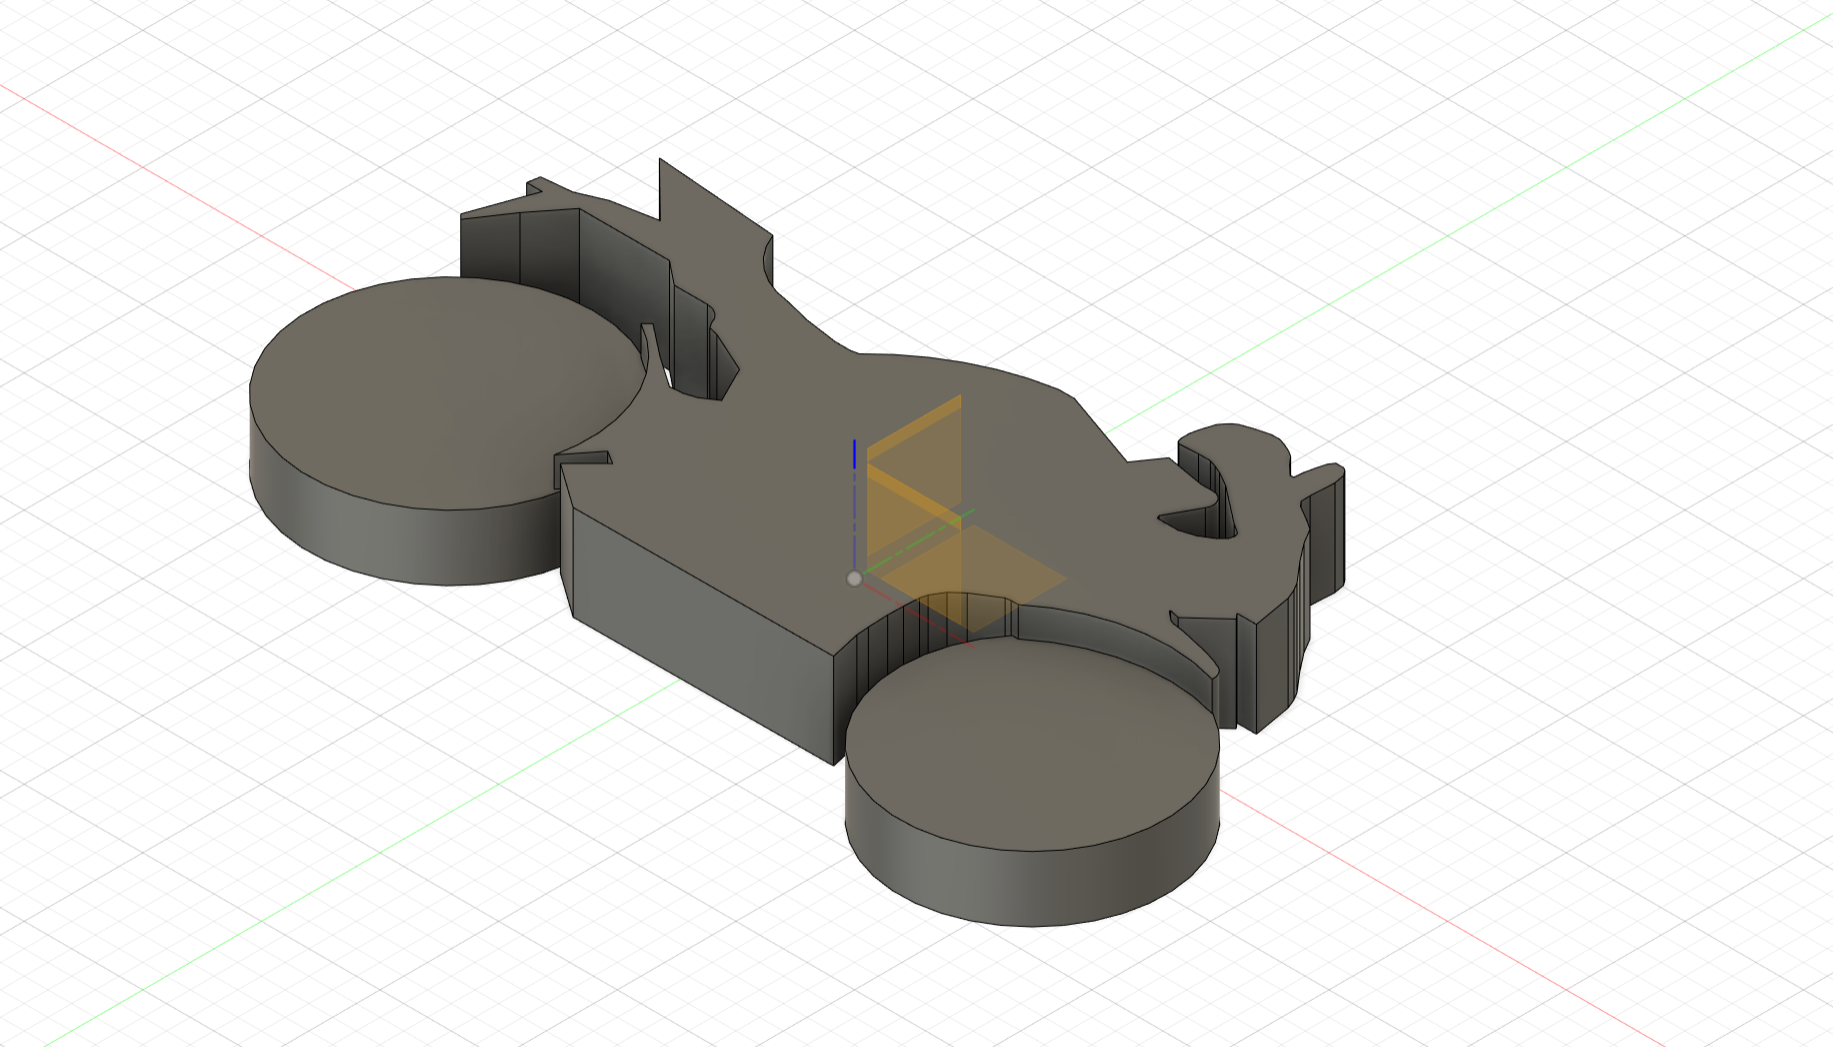 4_extruded body with wheels.png